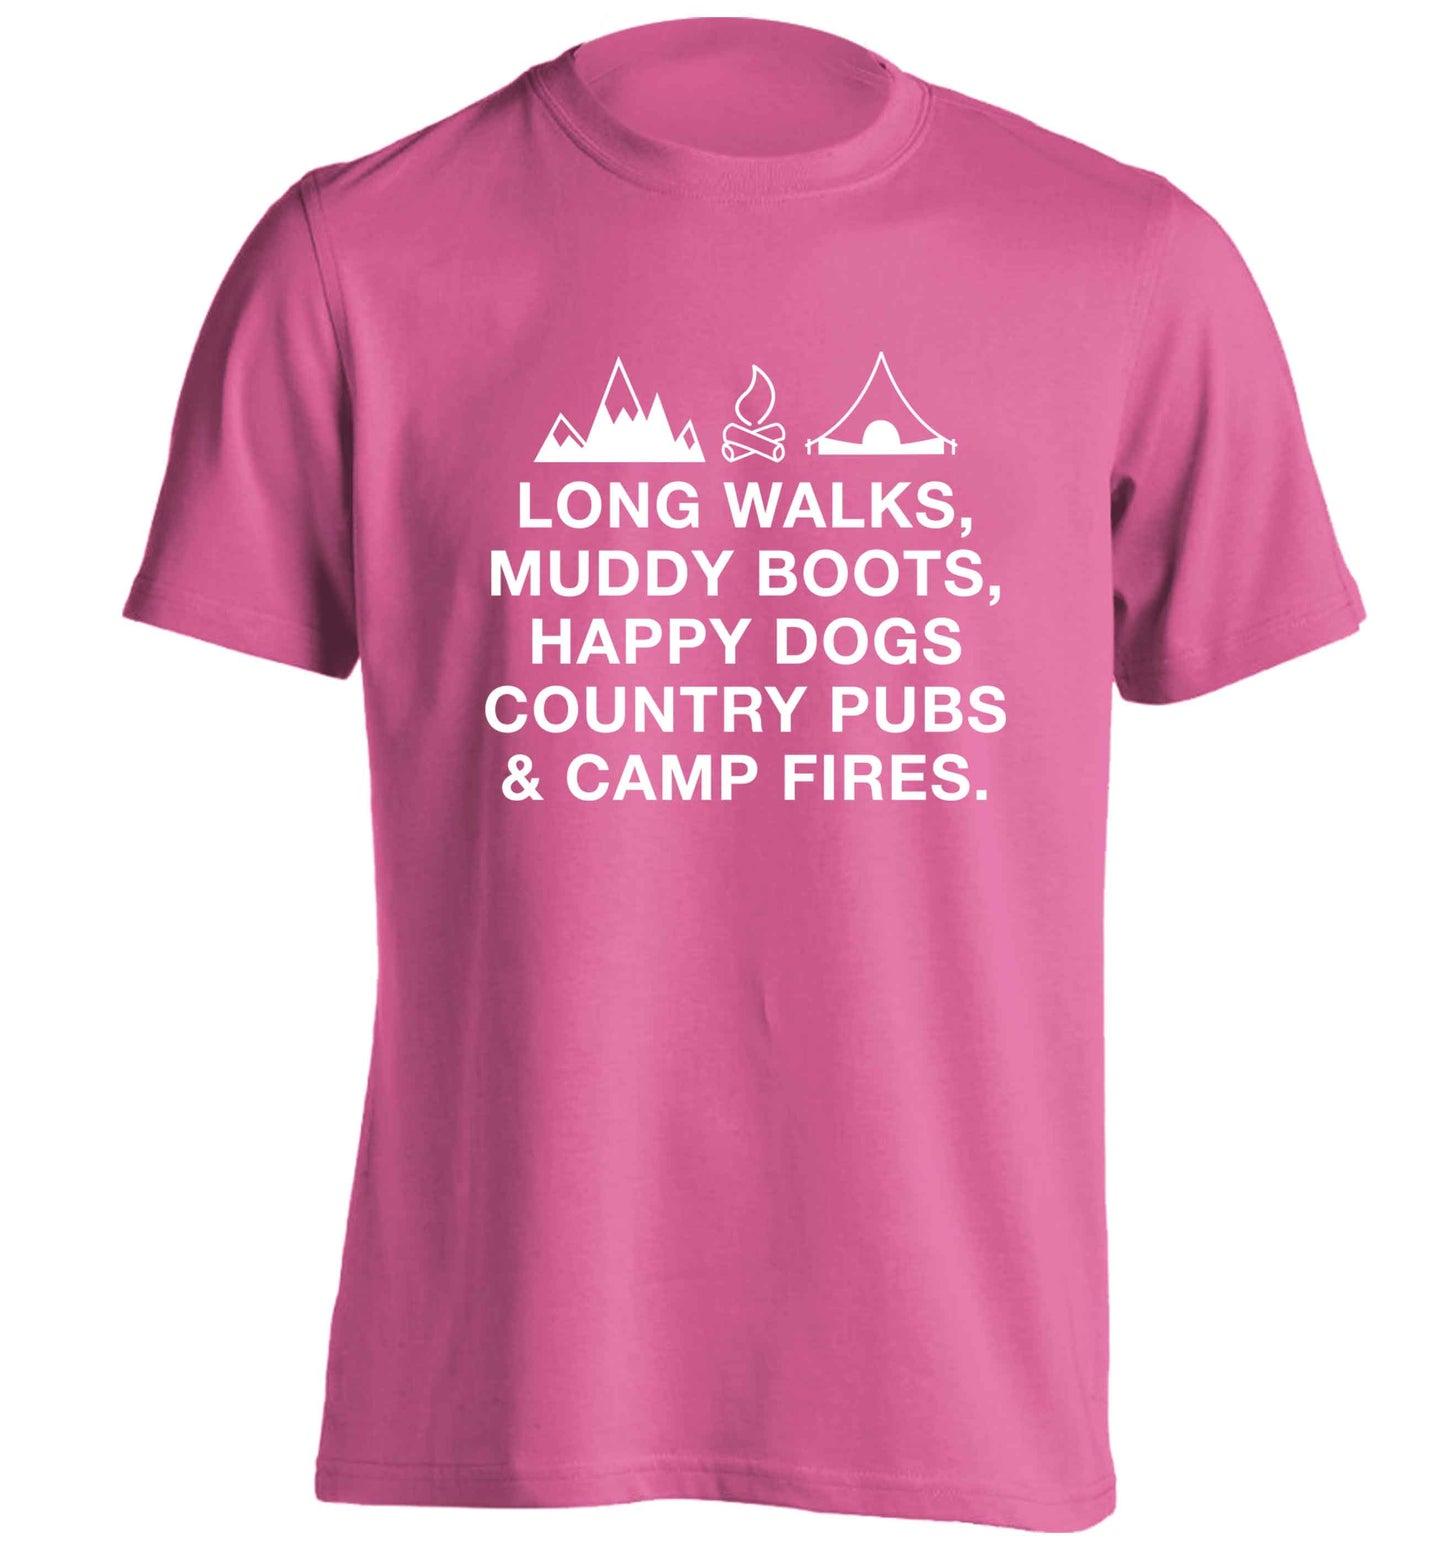 Long walks muddy boots happy dogs country pubs and camp fires adults unisex pink Tshirt 2XL